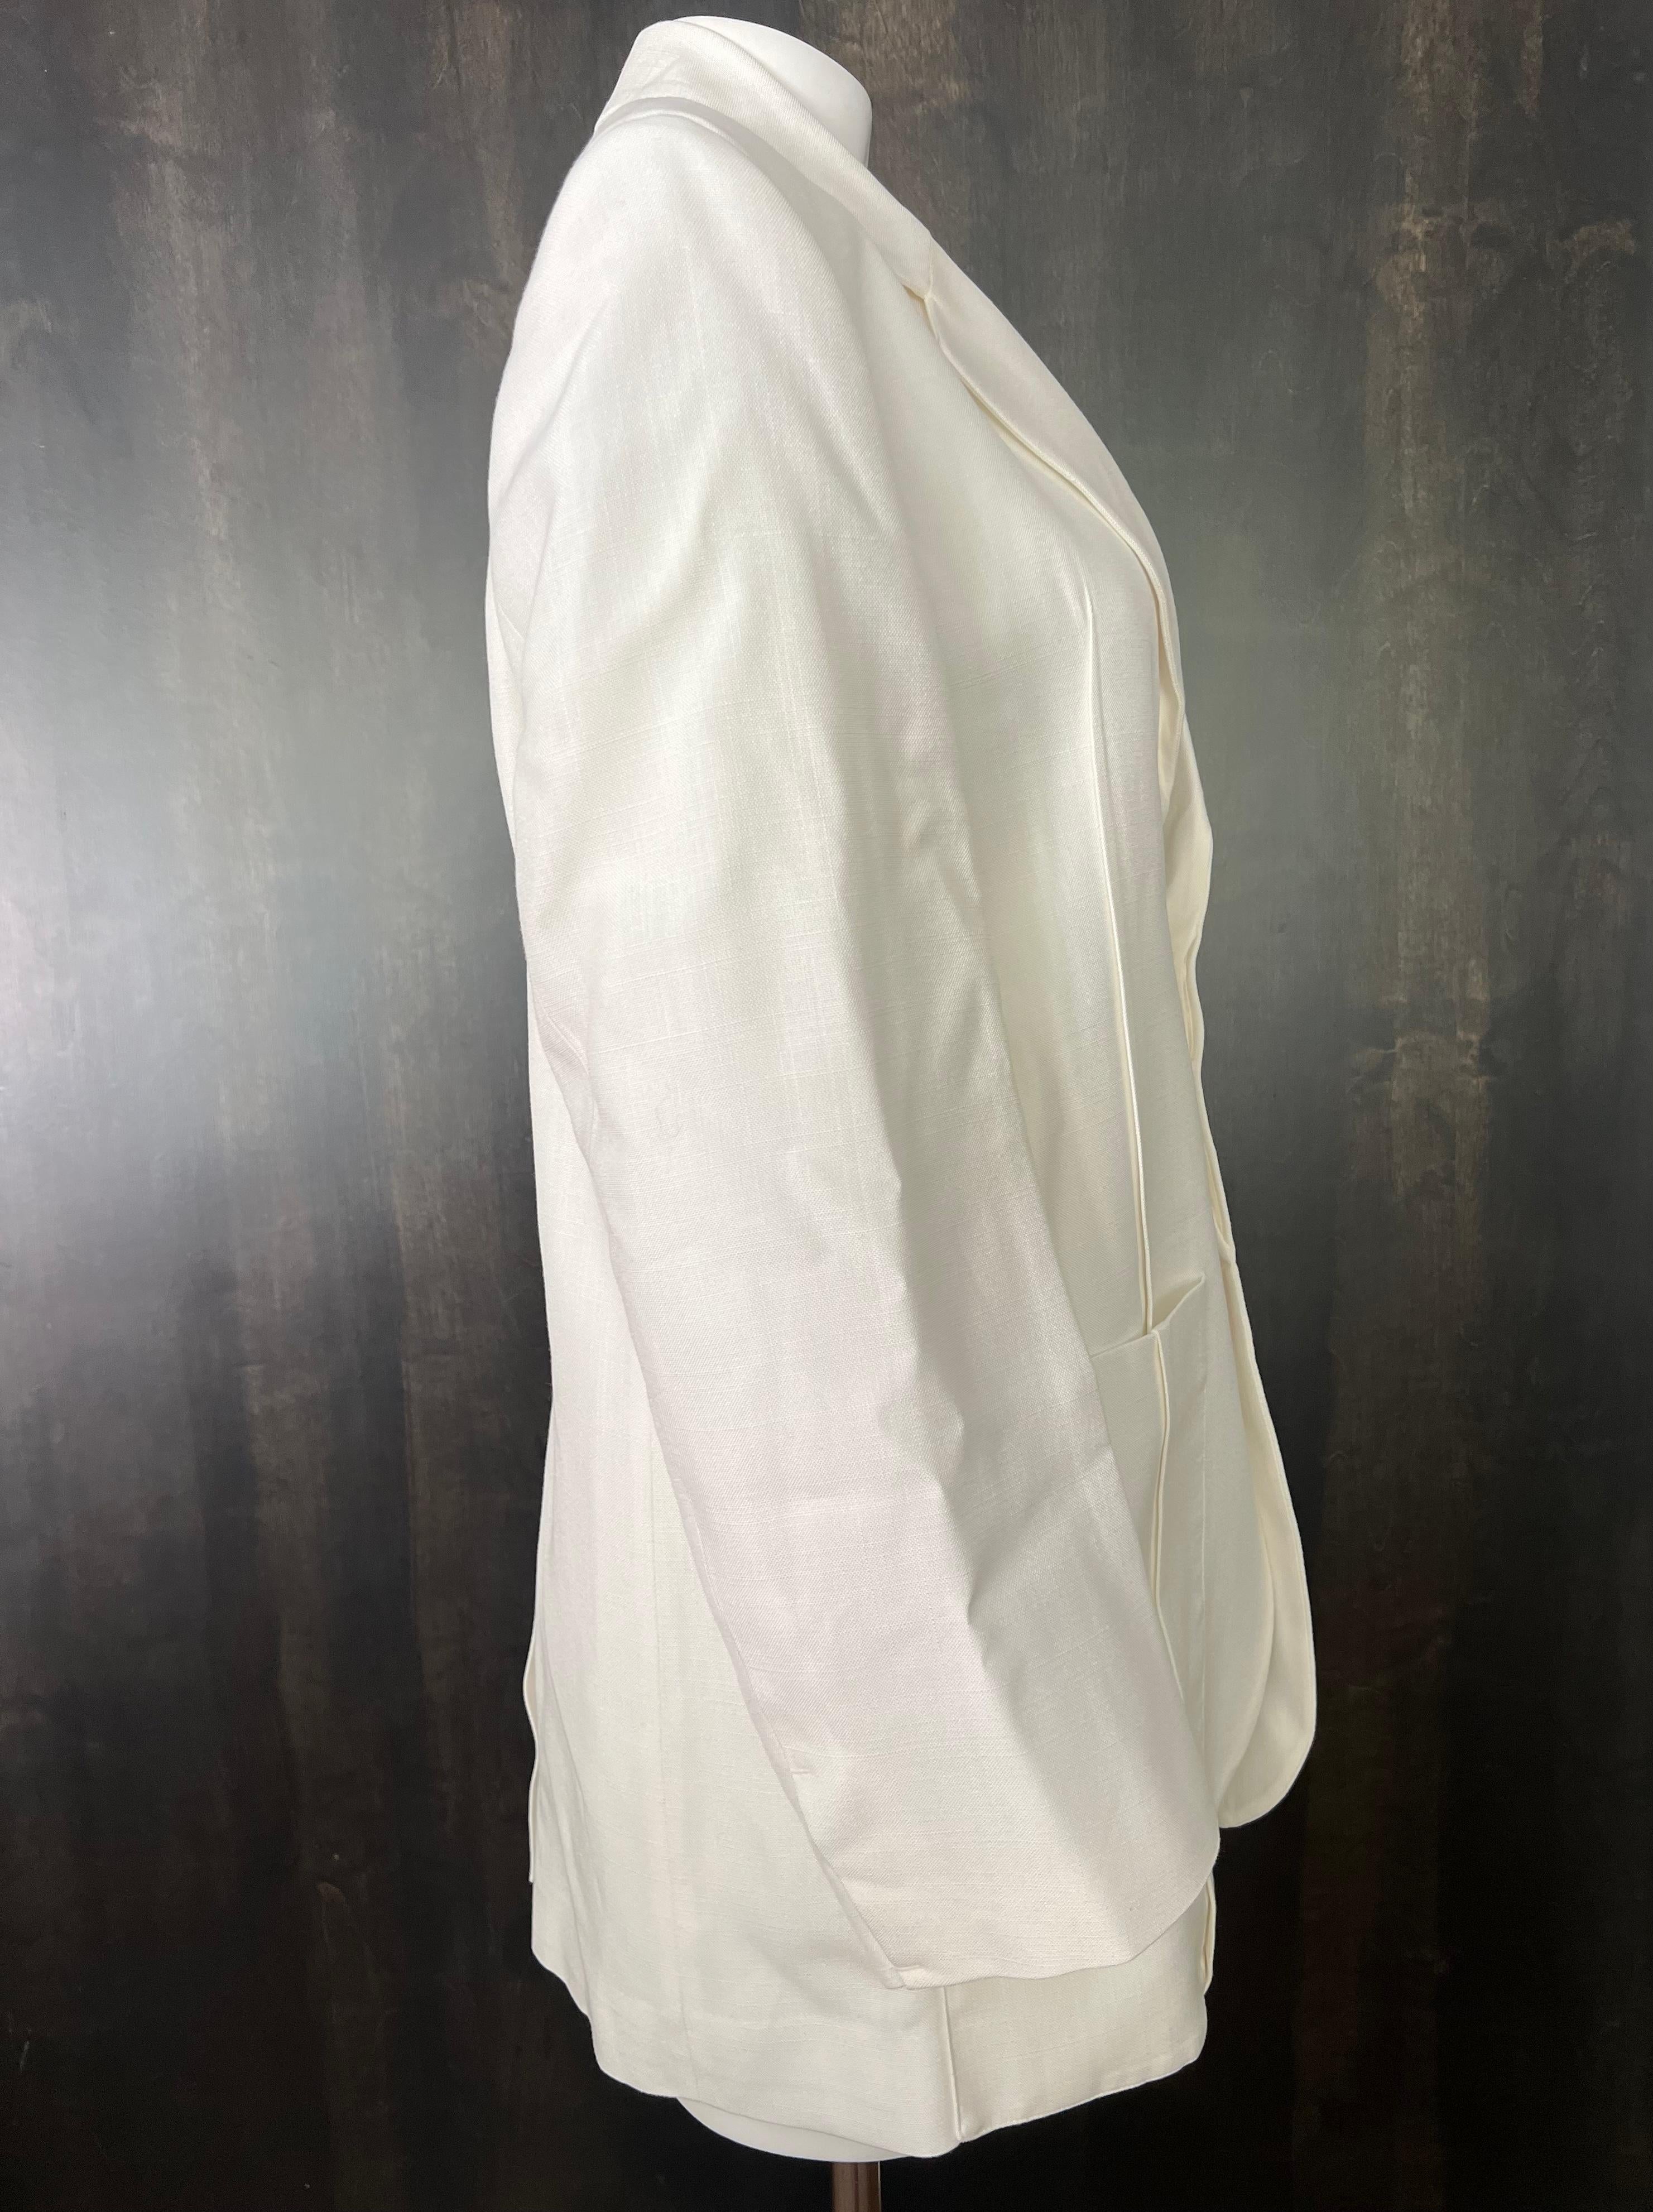 Jacquemus Le Coup De Soleil White Blazer Jacket, Size 38 In New Condition For Sale In Beverly Hills, CA